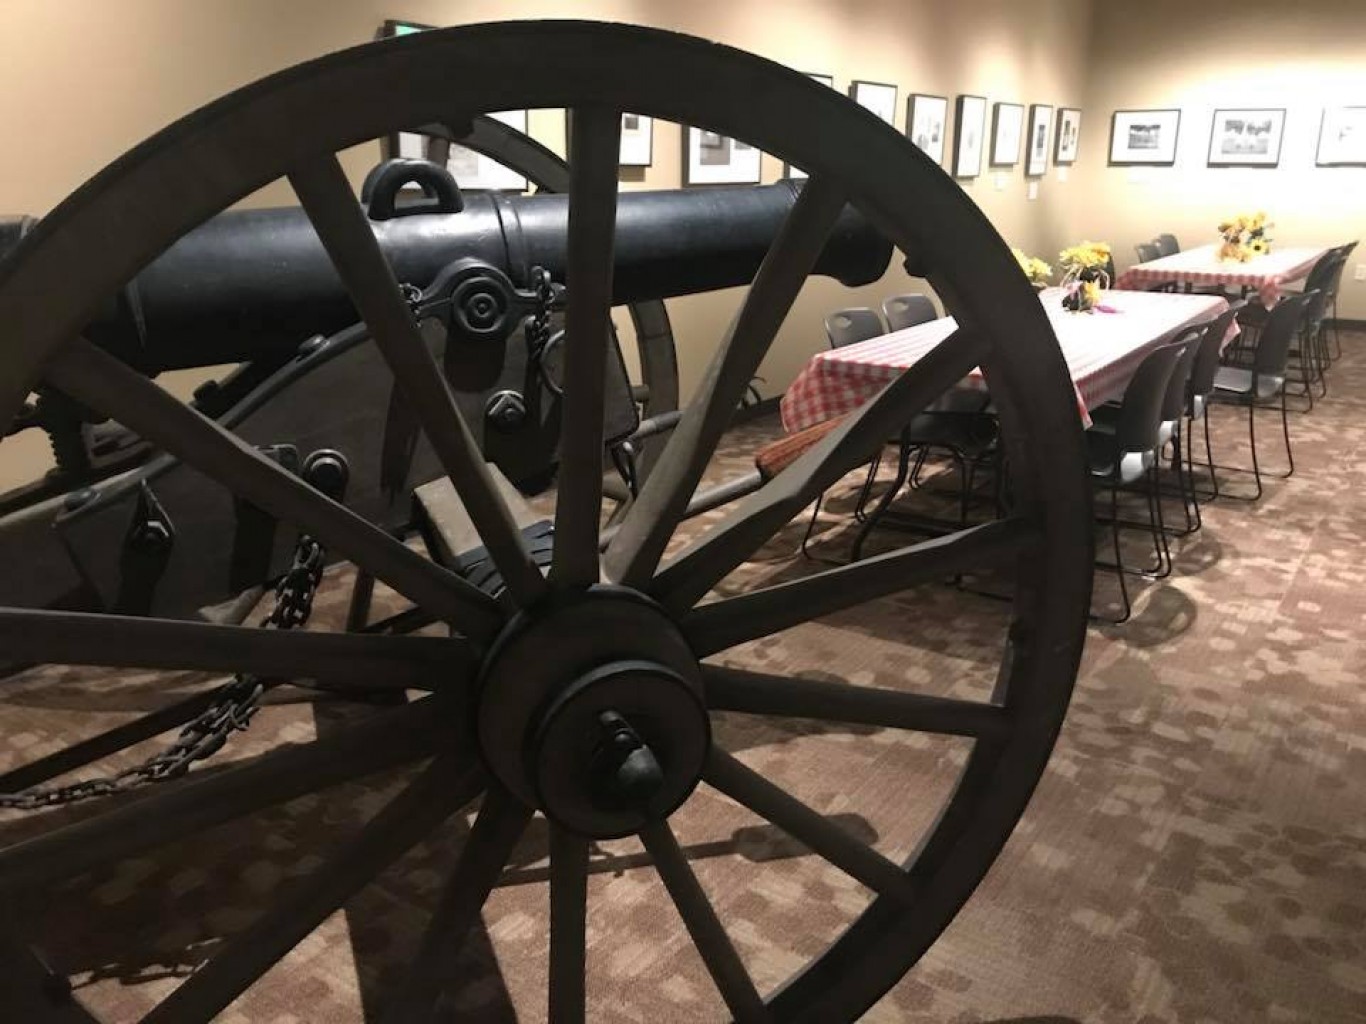 A Civil War Christmas Party at Honey Springs Battlefield and Visitor Center